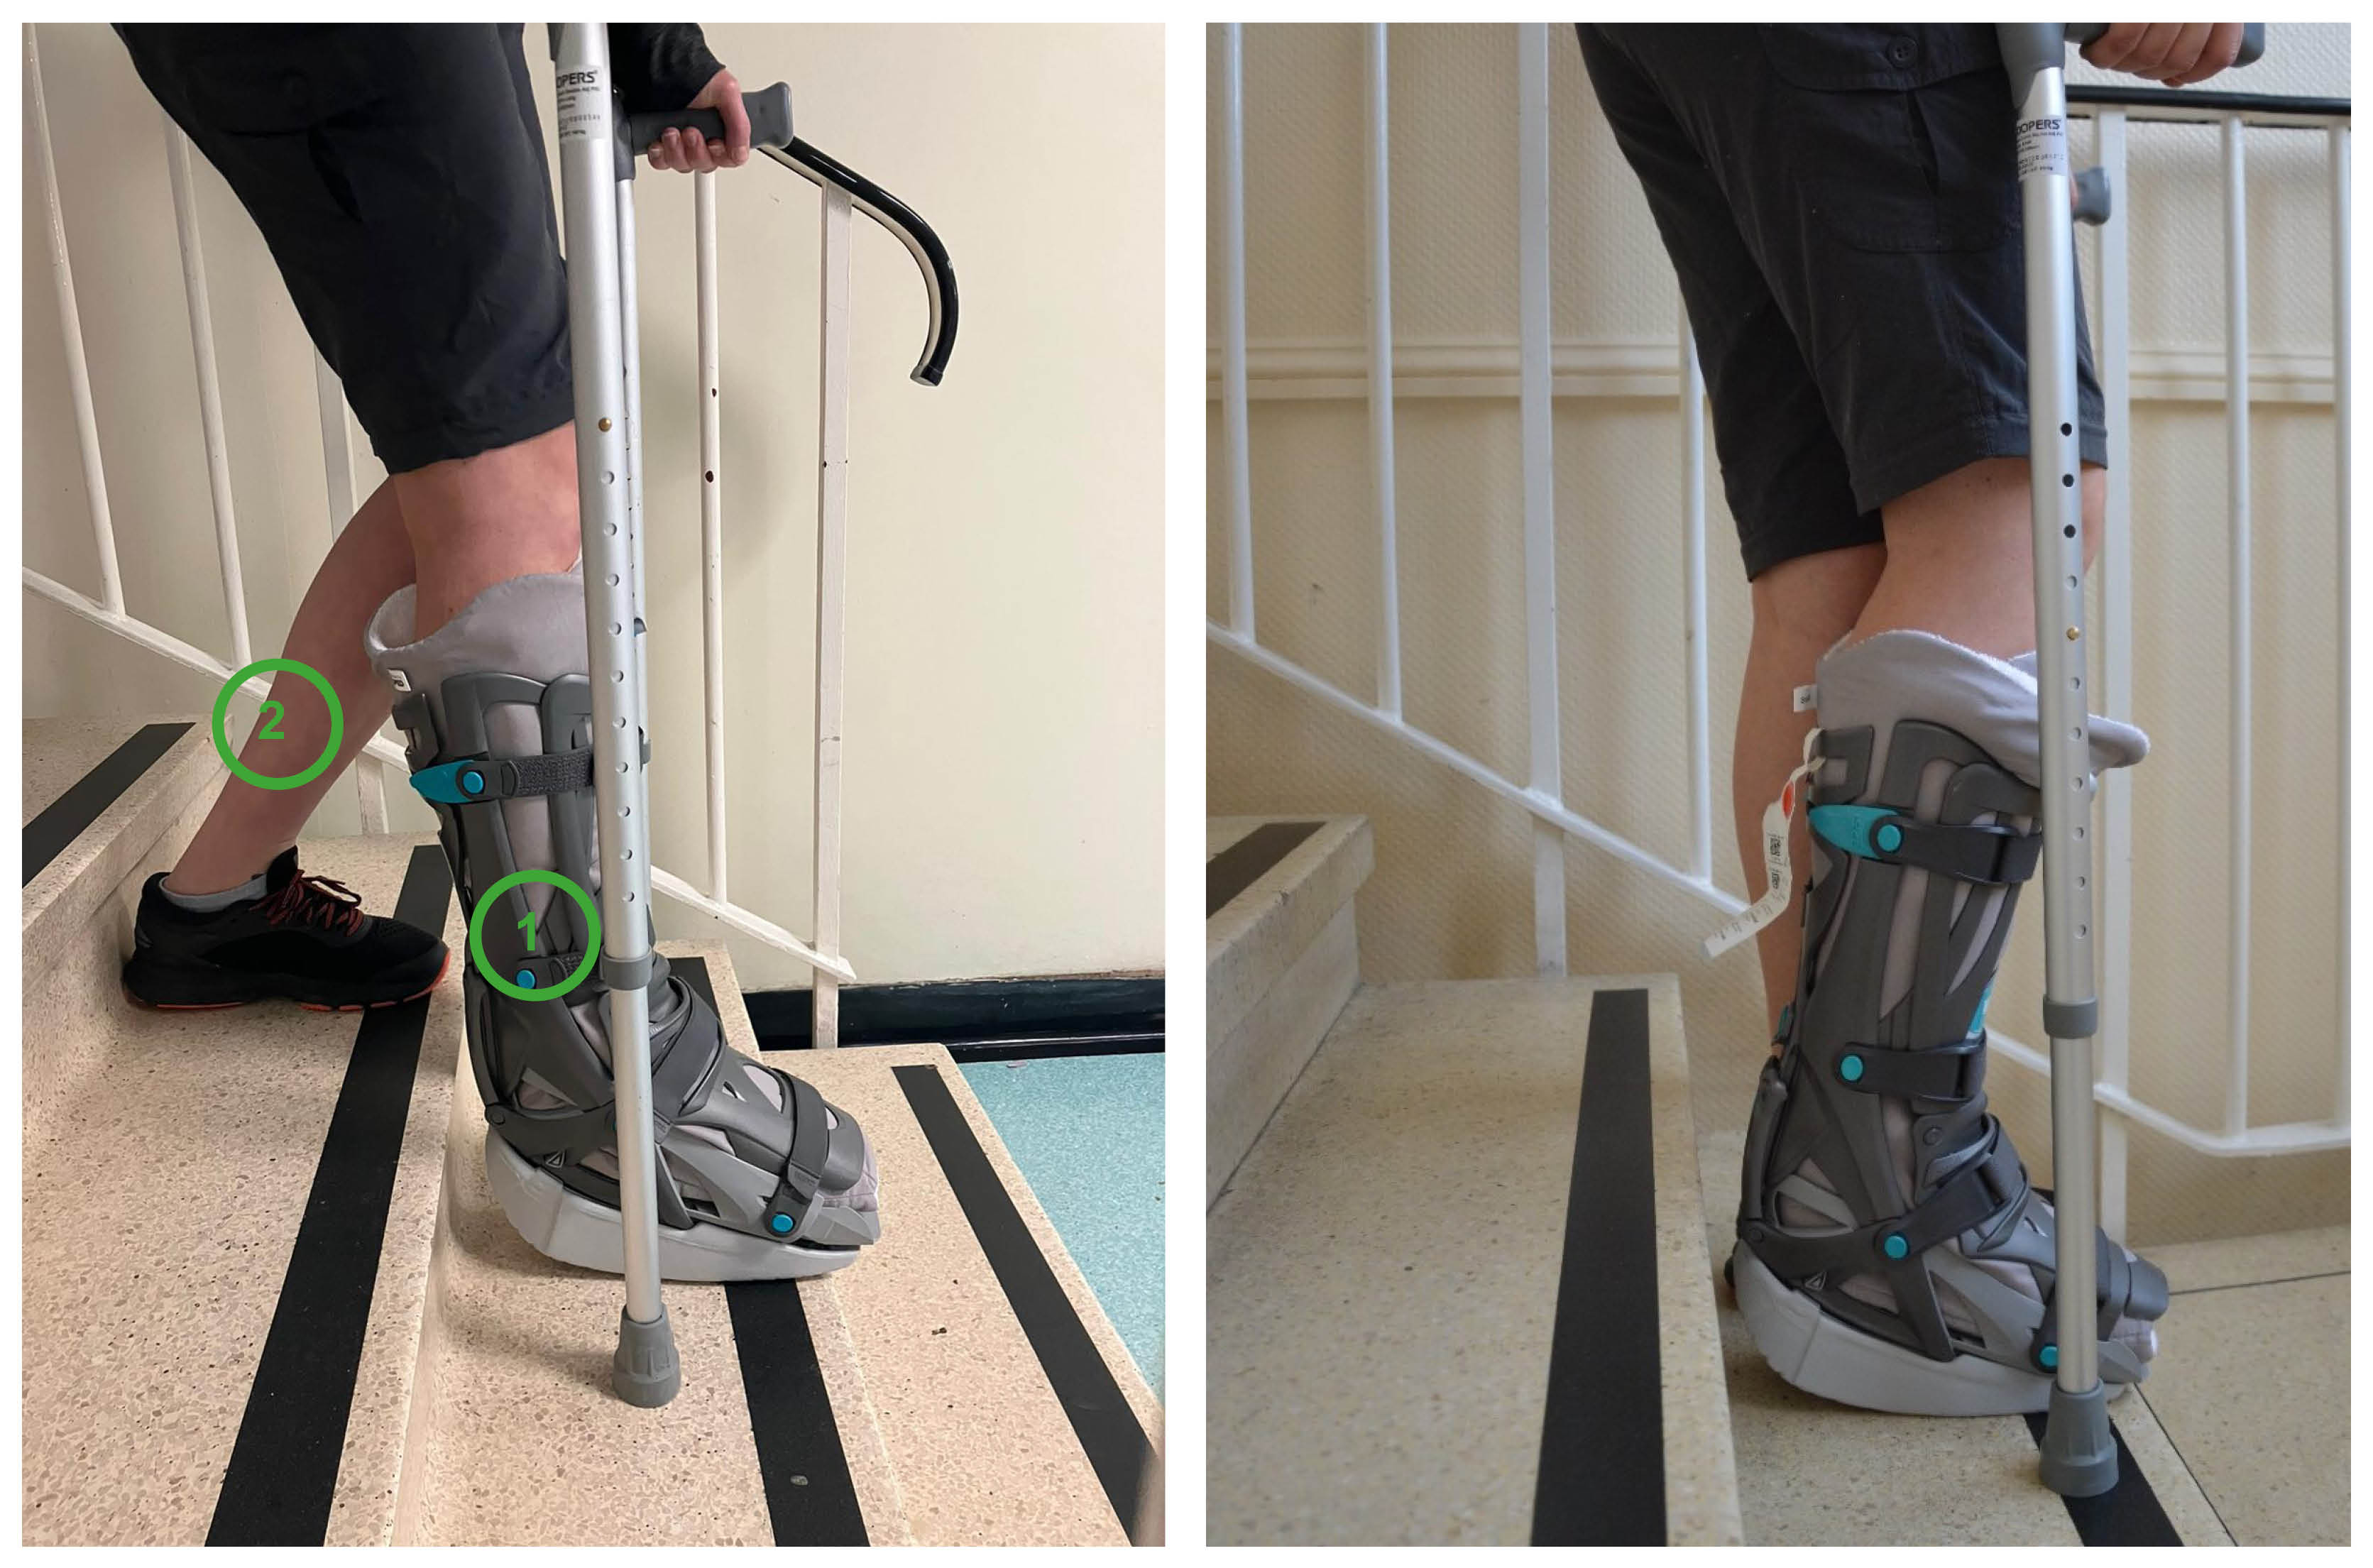 When going down the stairs, you should first put the crutches down, then your affected leg (1) and finally your non-affected leg (2).